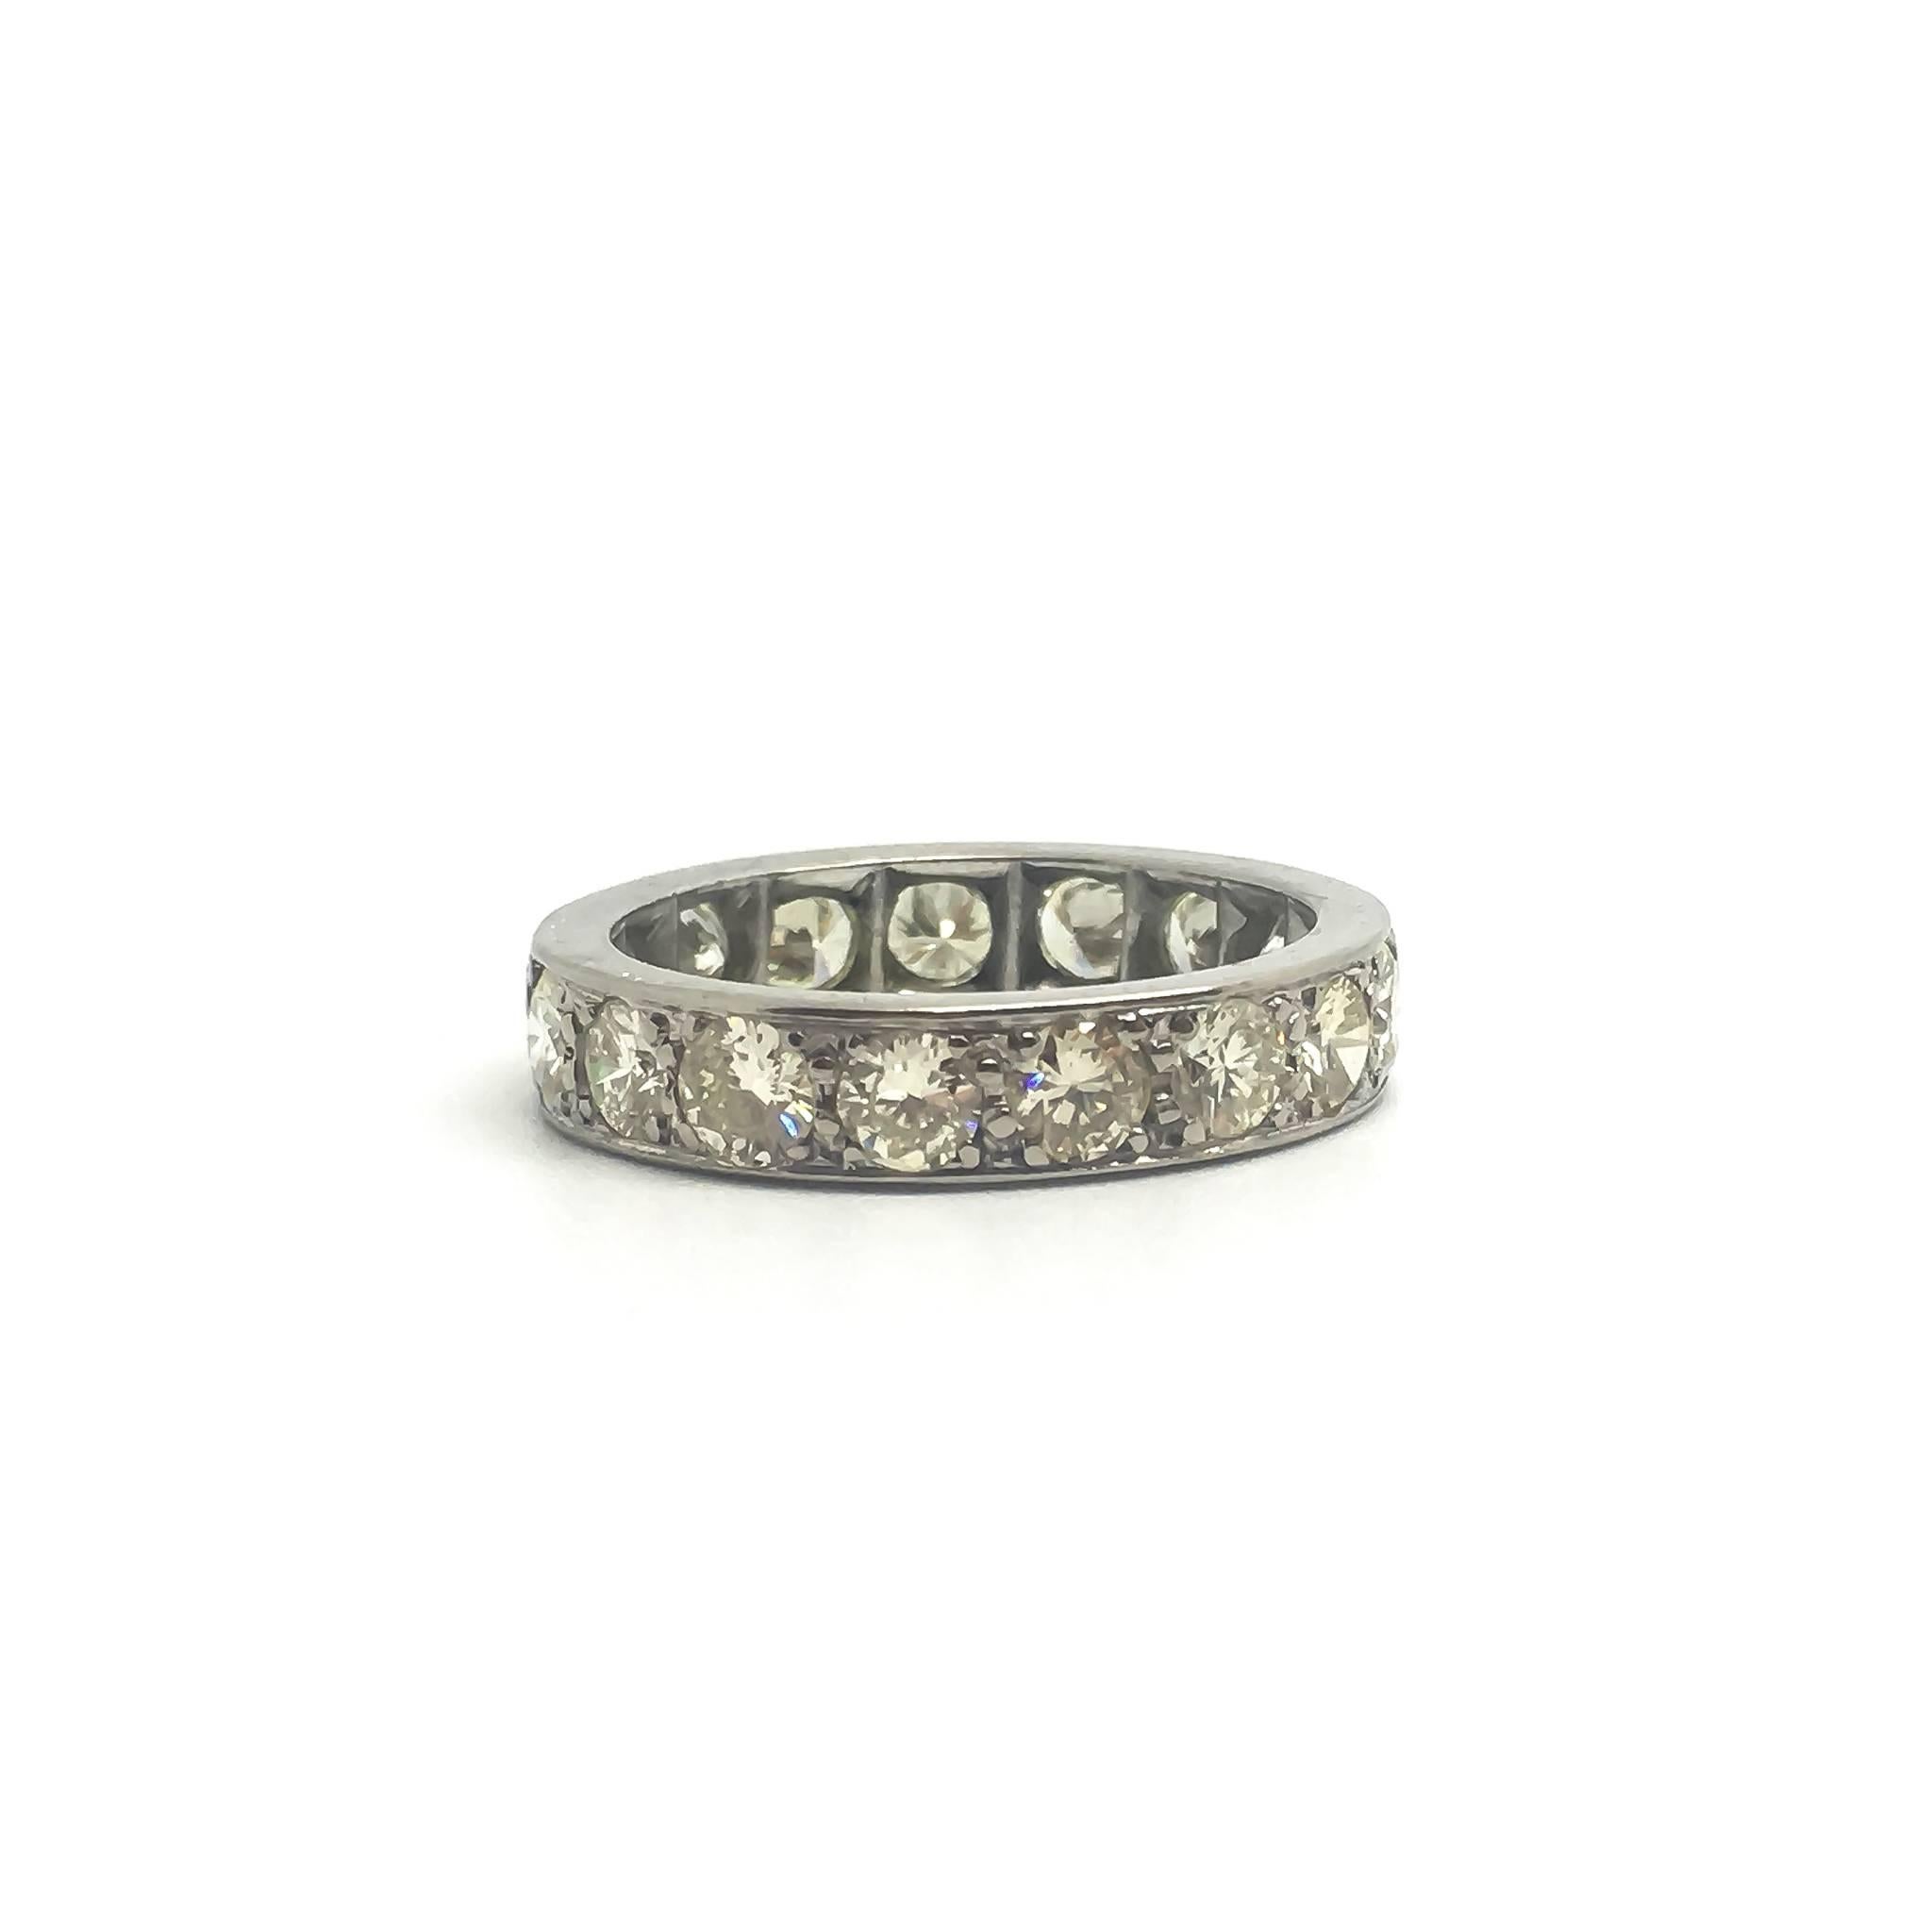 A diamond set palladium eternity ring circa 1950.

The brilliant round cut diamonds are approximately 0.17ct each giving a total estimated weight of 3 carats.

UK size P 1/2
US size 7 3/4

Diamonds are estimated VS2/SI clarity and J/K colour. 
